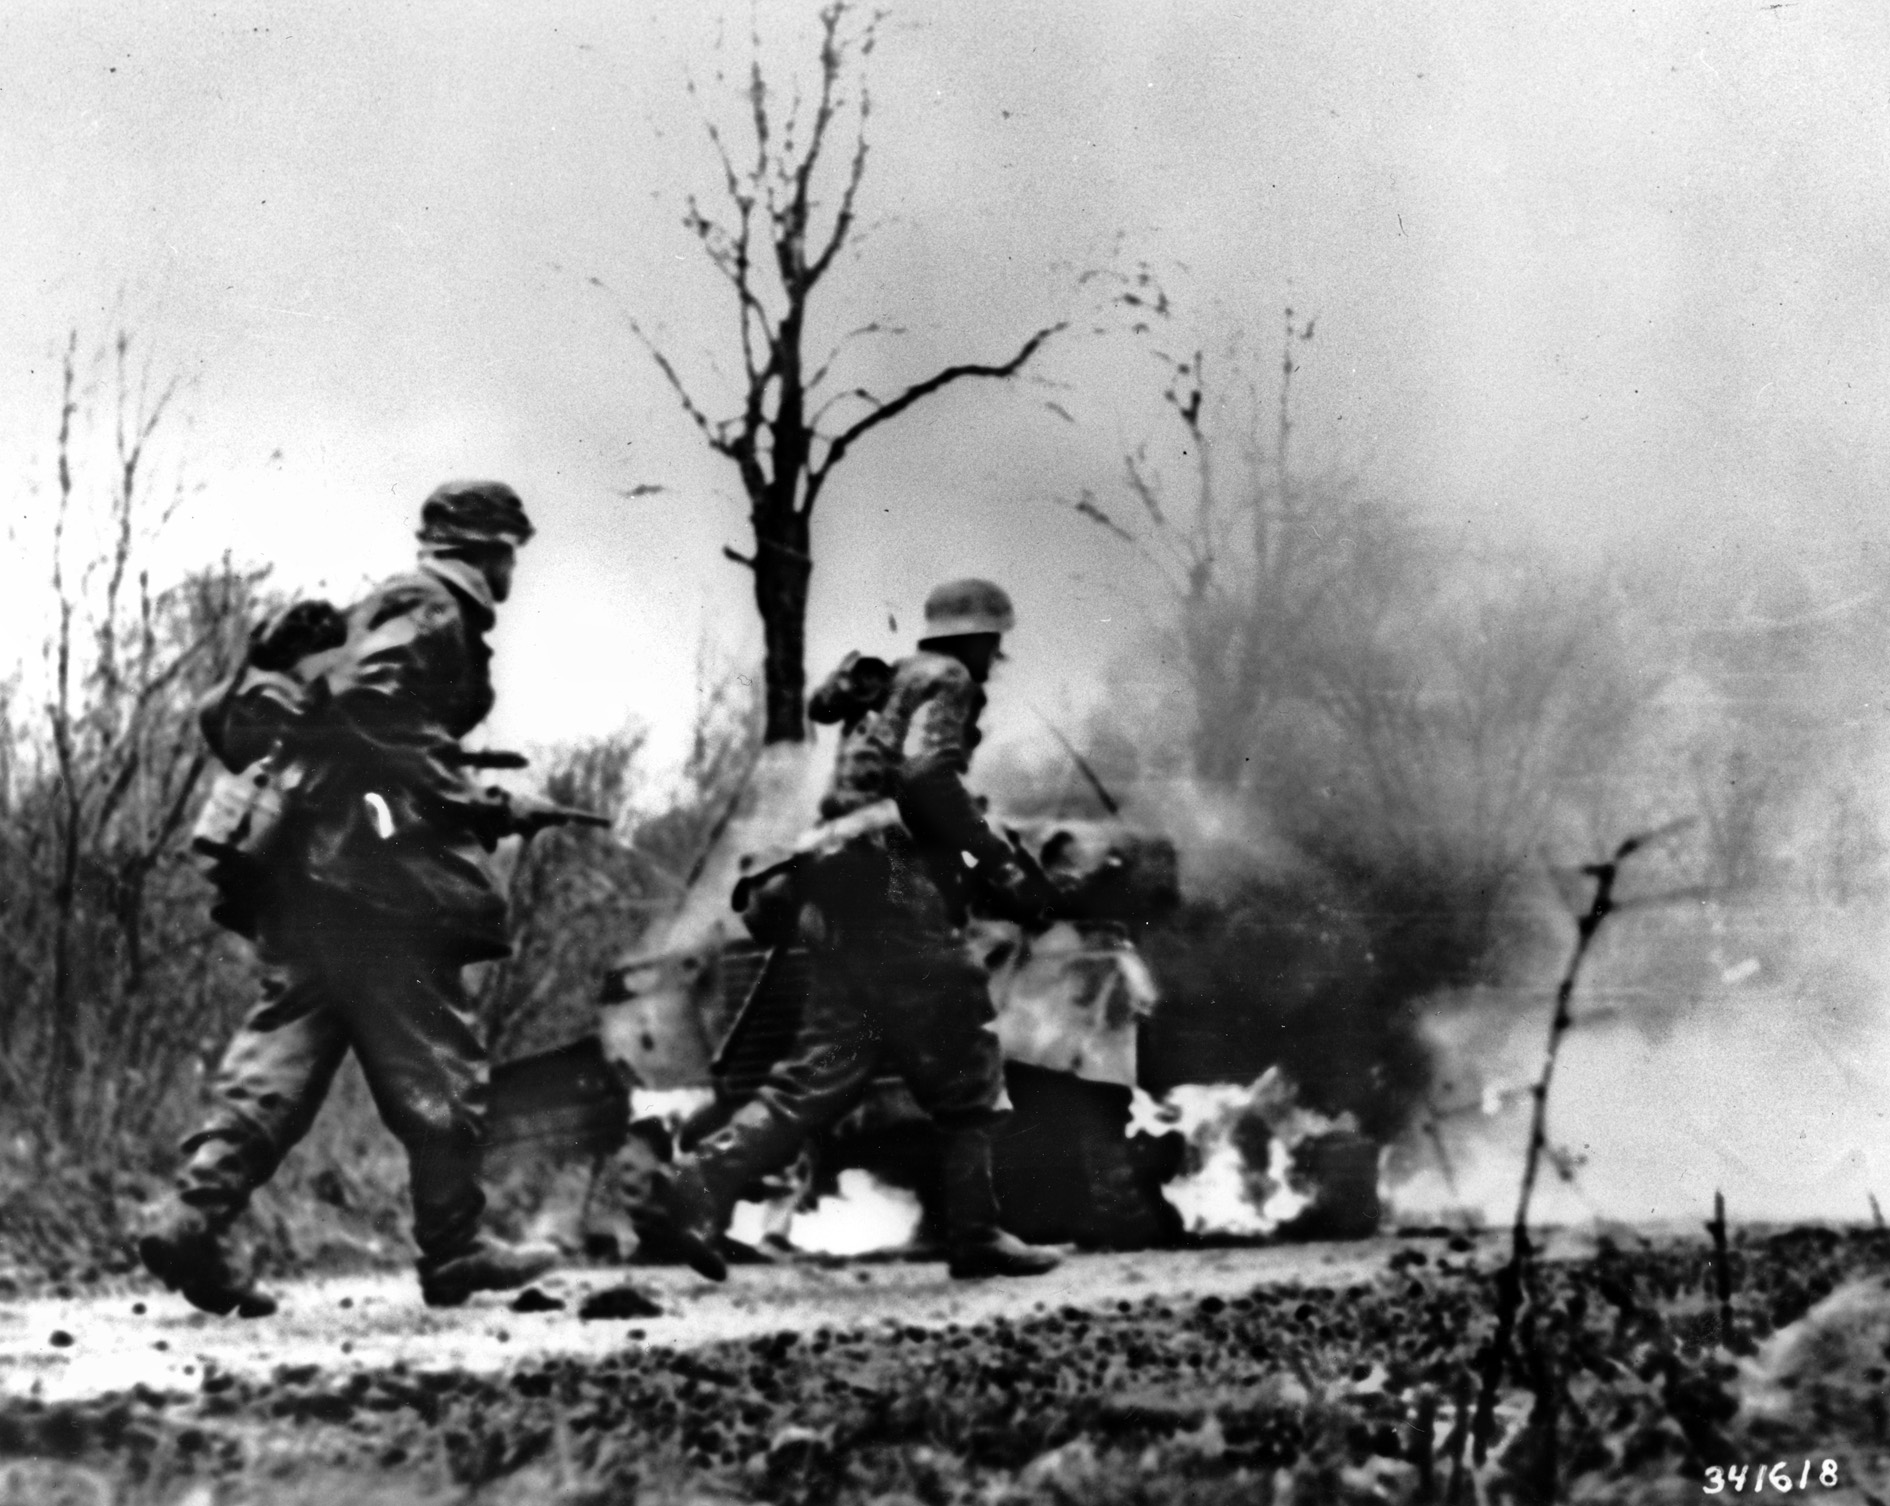 SS panzergrenadiers advance past burning American vehicles in German film footage that may have been staged for propaganda purposes.